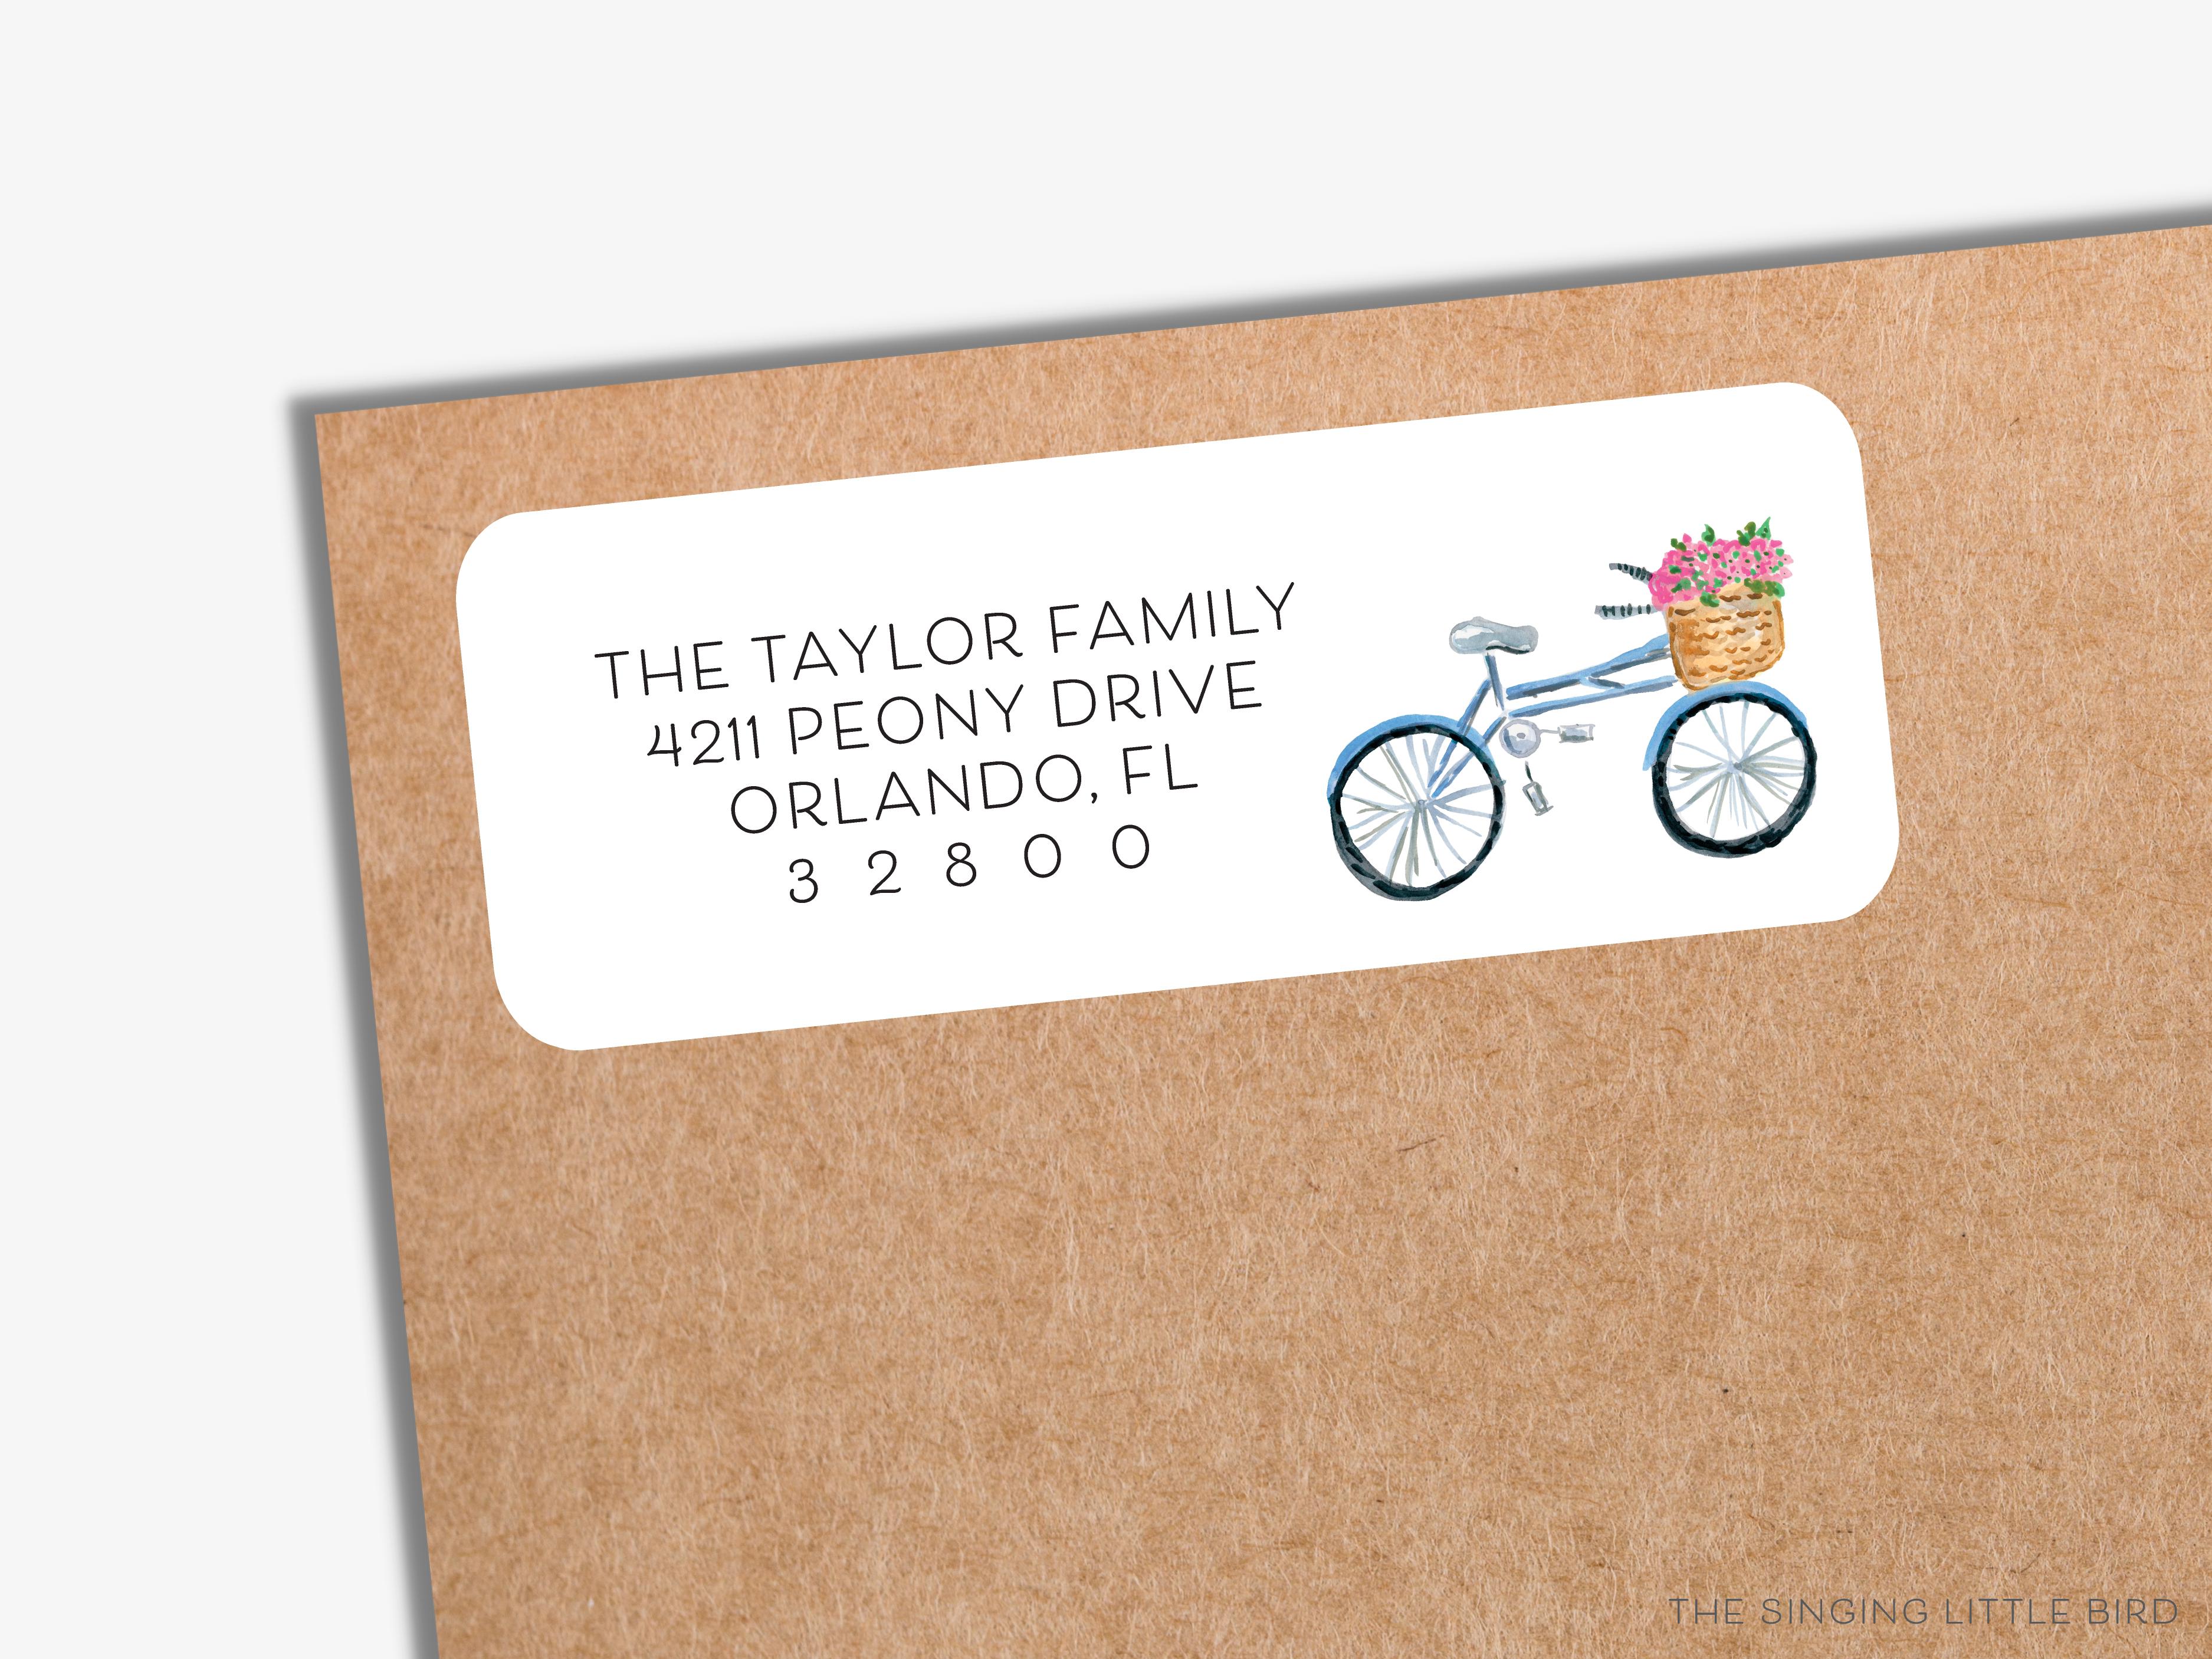 Bicycle with Flowers Return Address Labels-These personalized return address labels are 2.625" x 1" and feature our hand-painted watercolor bicycle with a basket of flowers, printed in the USA on beautiful matte finish labels. These make great gifts for yourself or the bike lover.-The Singing Little Bird